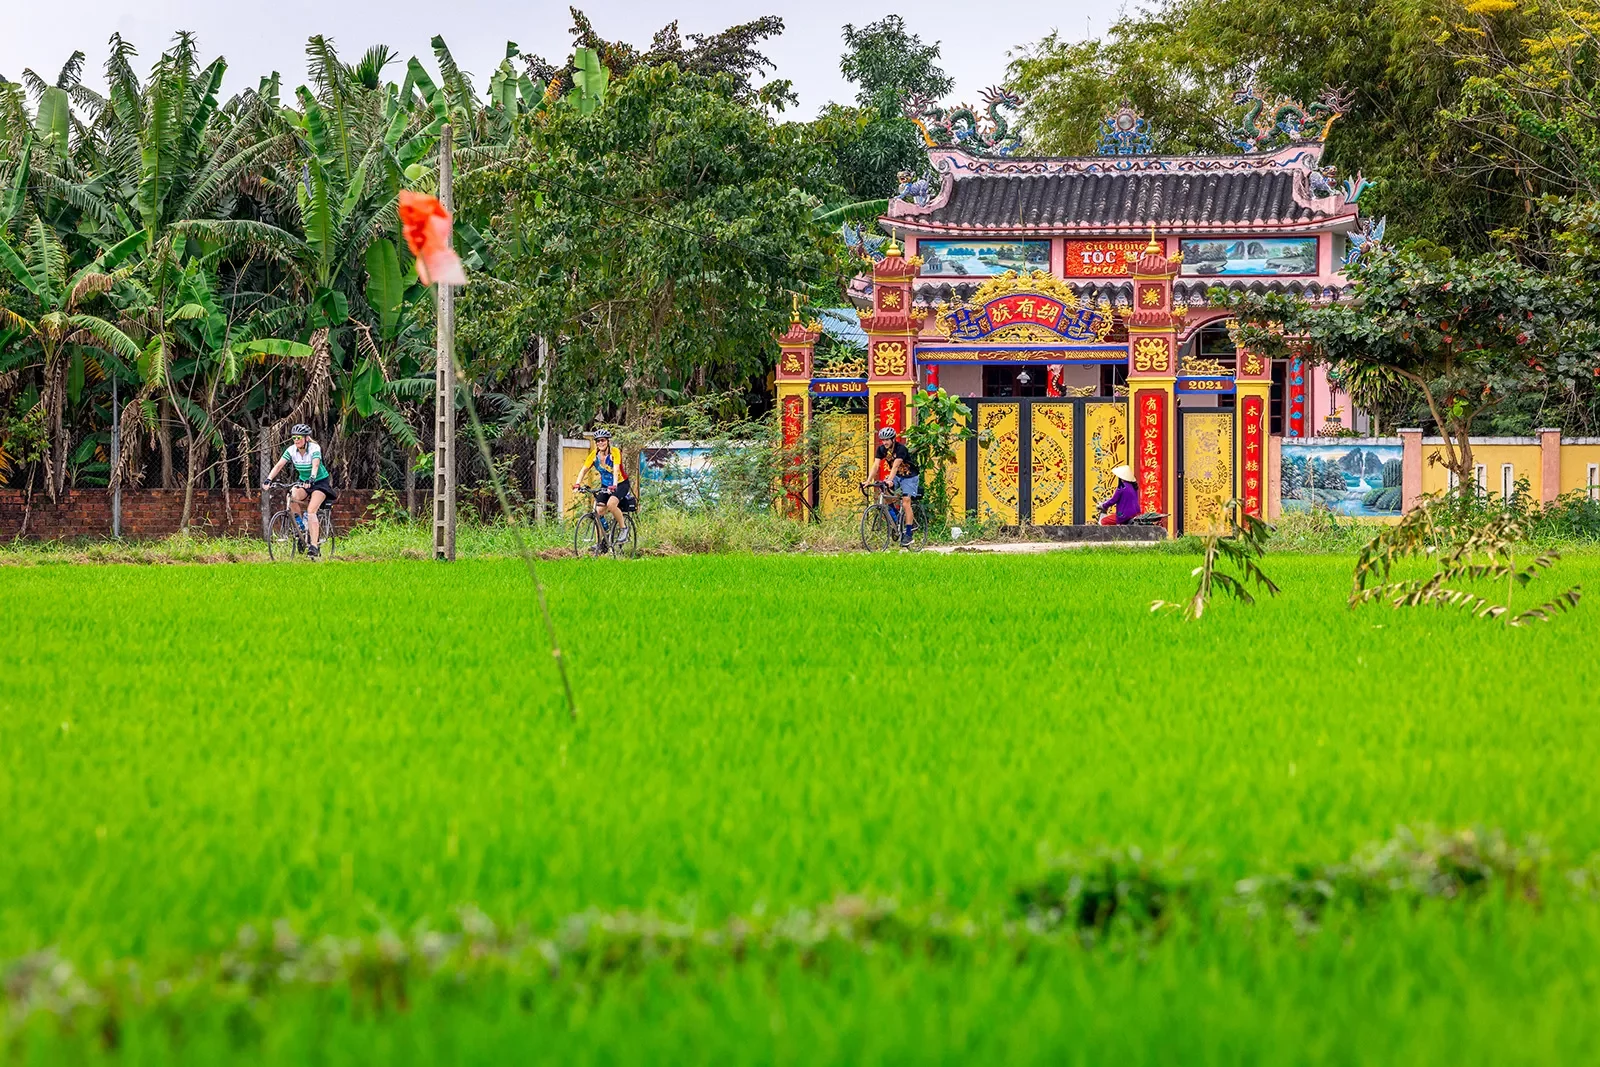 A green field with a colorful temple in the background